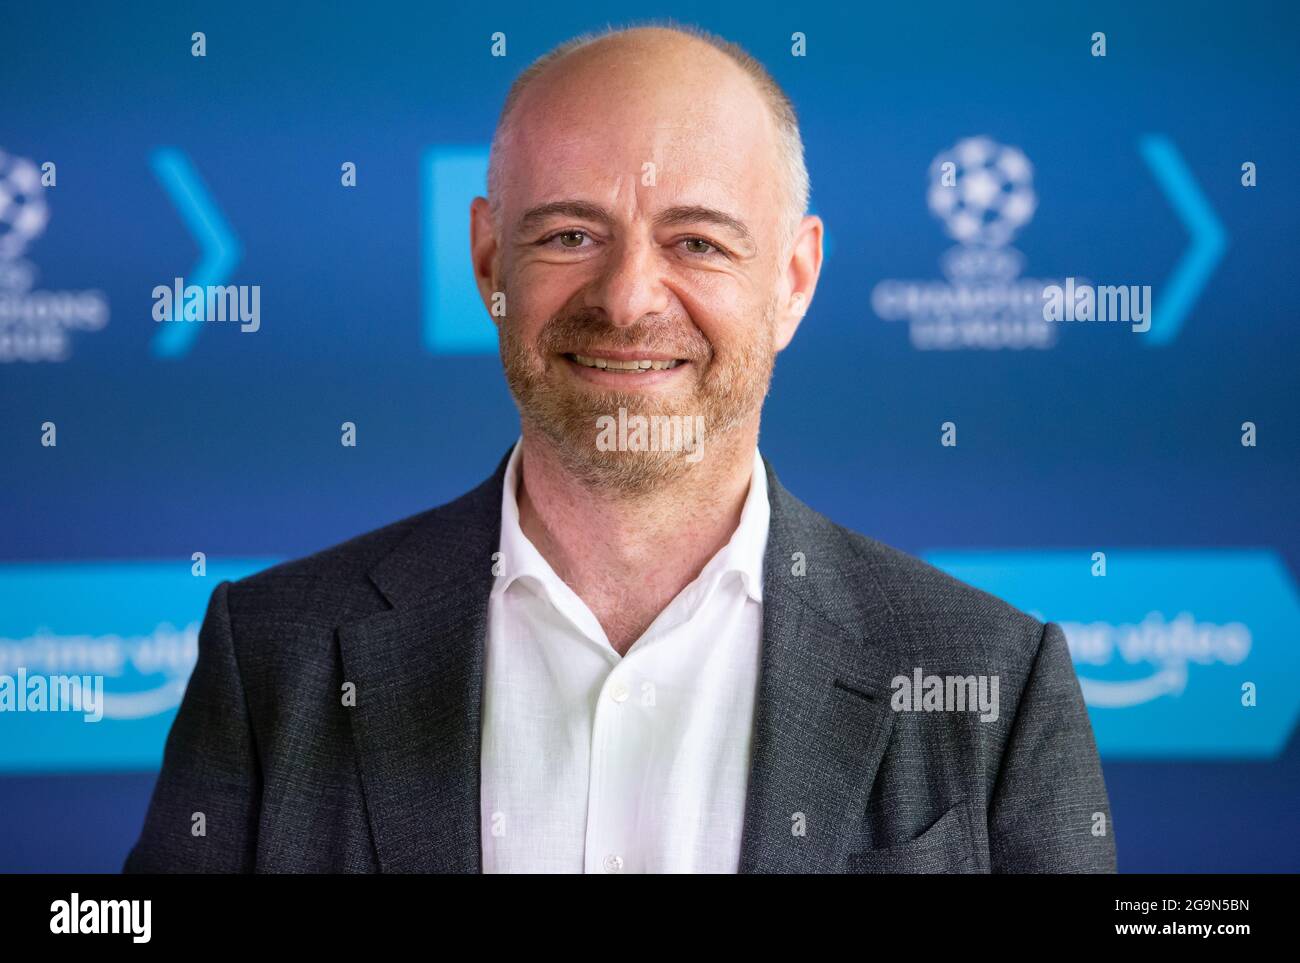 Munich, Germany. 27th July, 2021. Alex Green, Managing Director Sports at  Amazon Prime Video EU, takes part in a press conference of Amazon Prime  Video. Amazon will show Champions League matches from